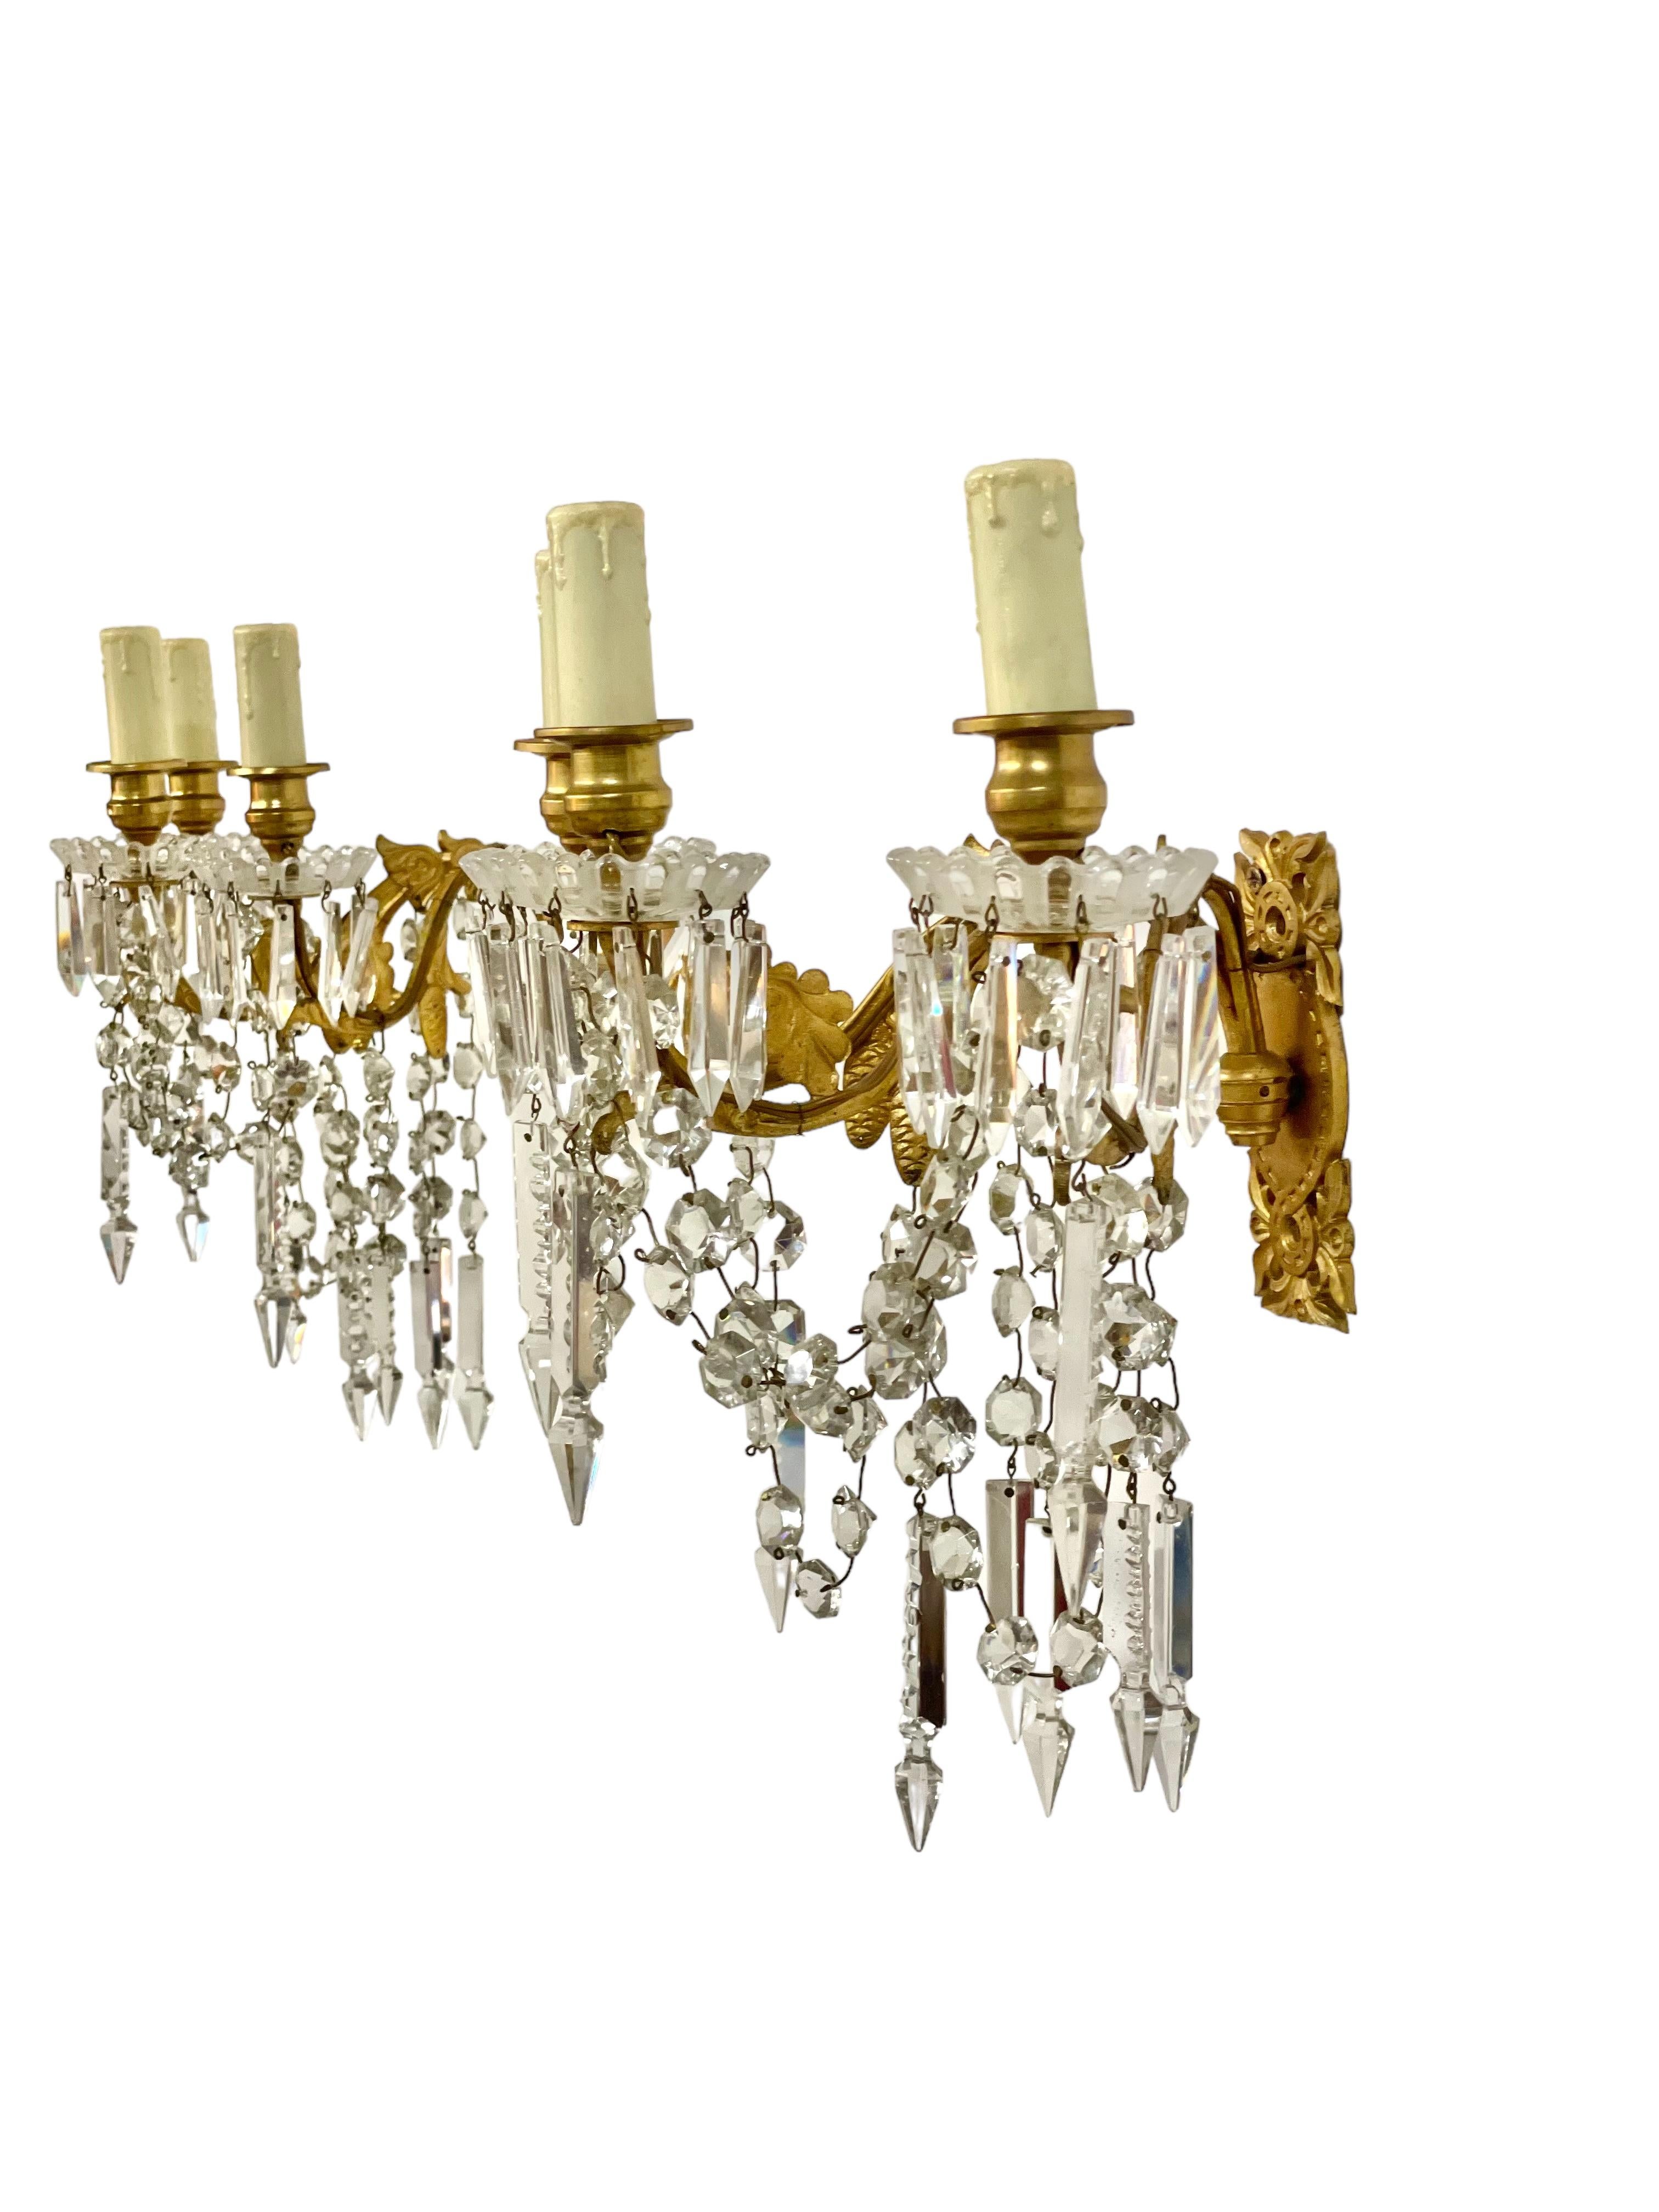 19th Century Pair of Baccarat Wall Sconces in Gilt Bronze and Crystal For Sale 4